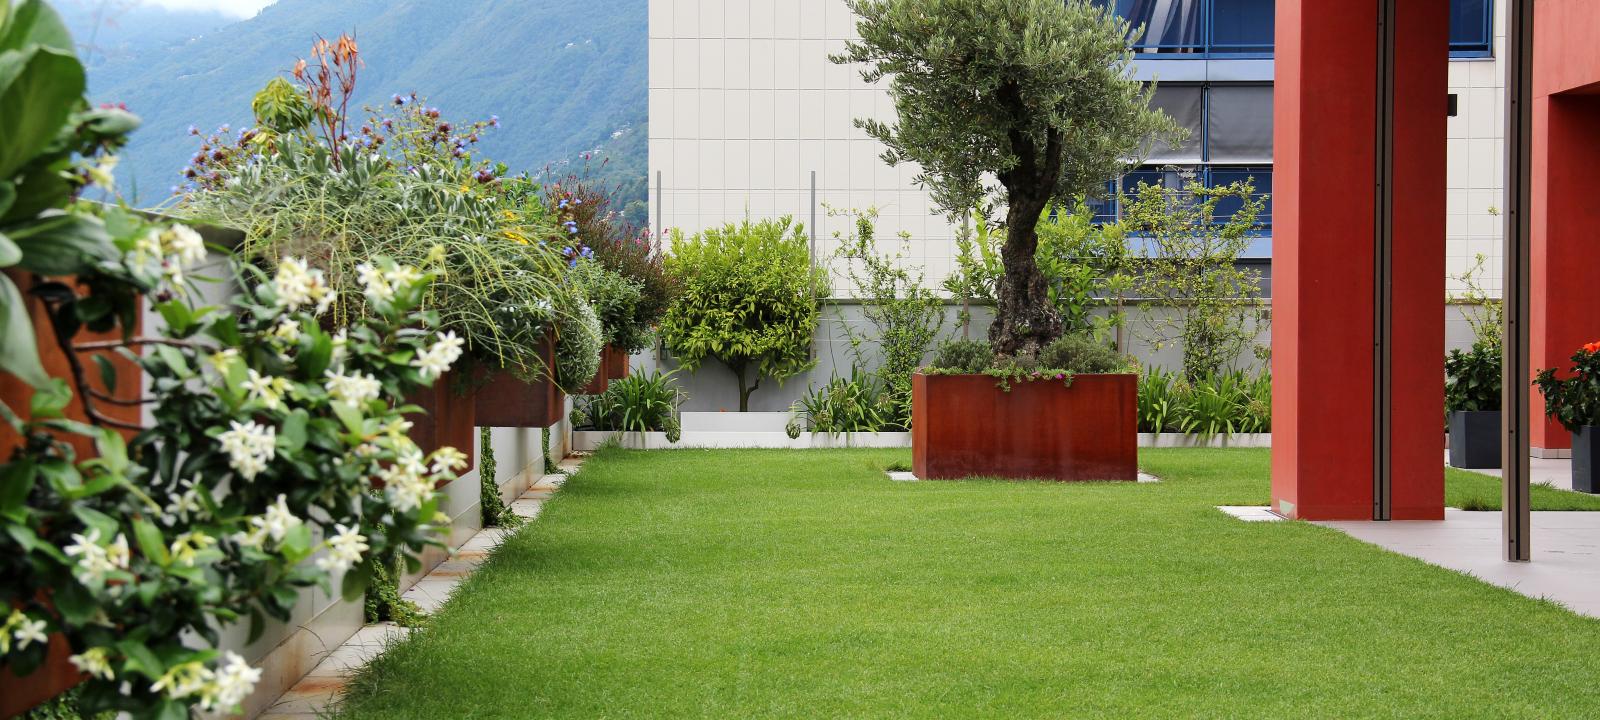 Roof garden with lawn, hanging flower boxes and an olive tree in a rust look planter